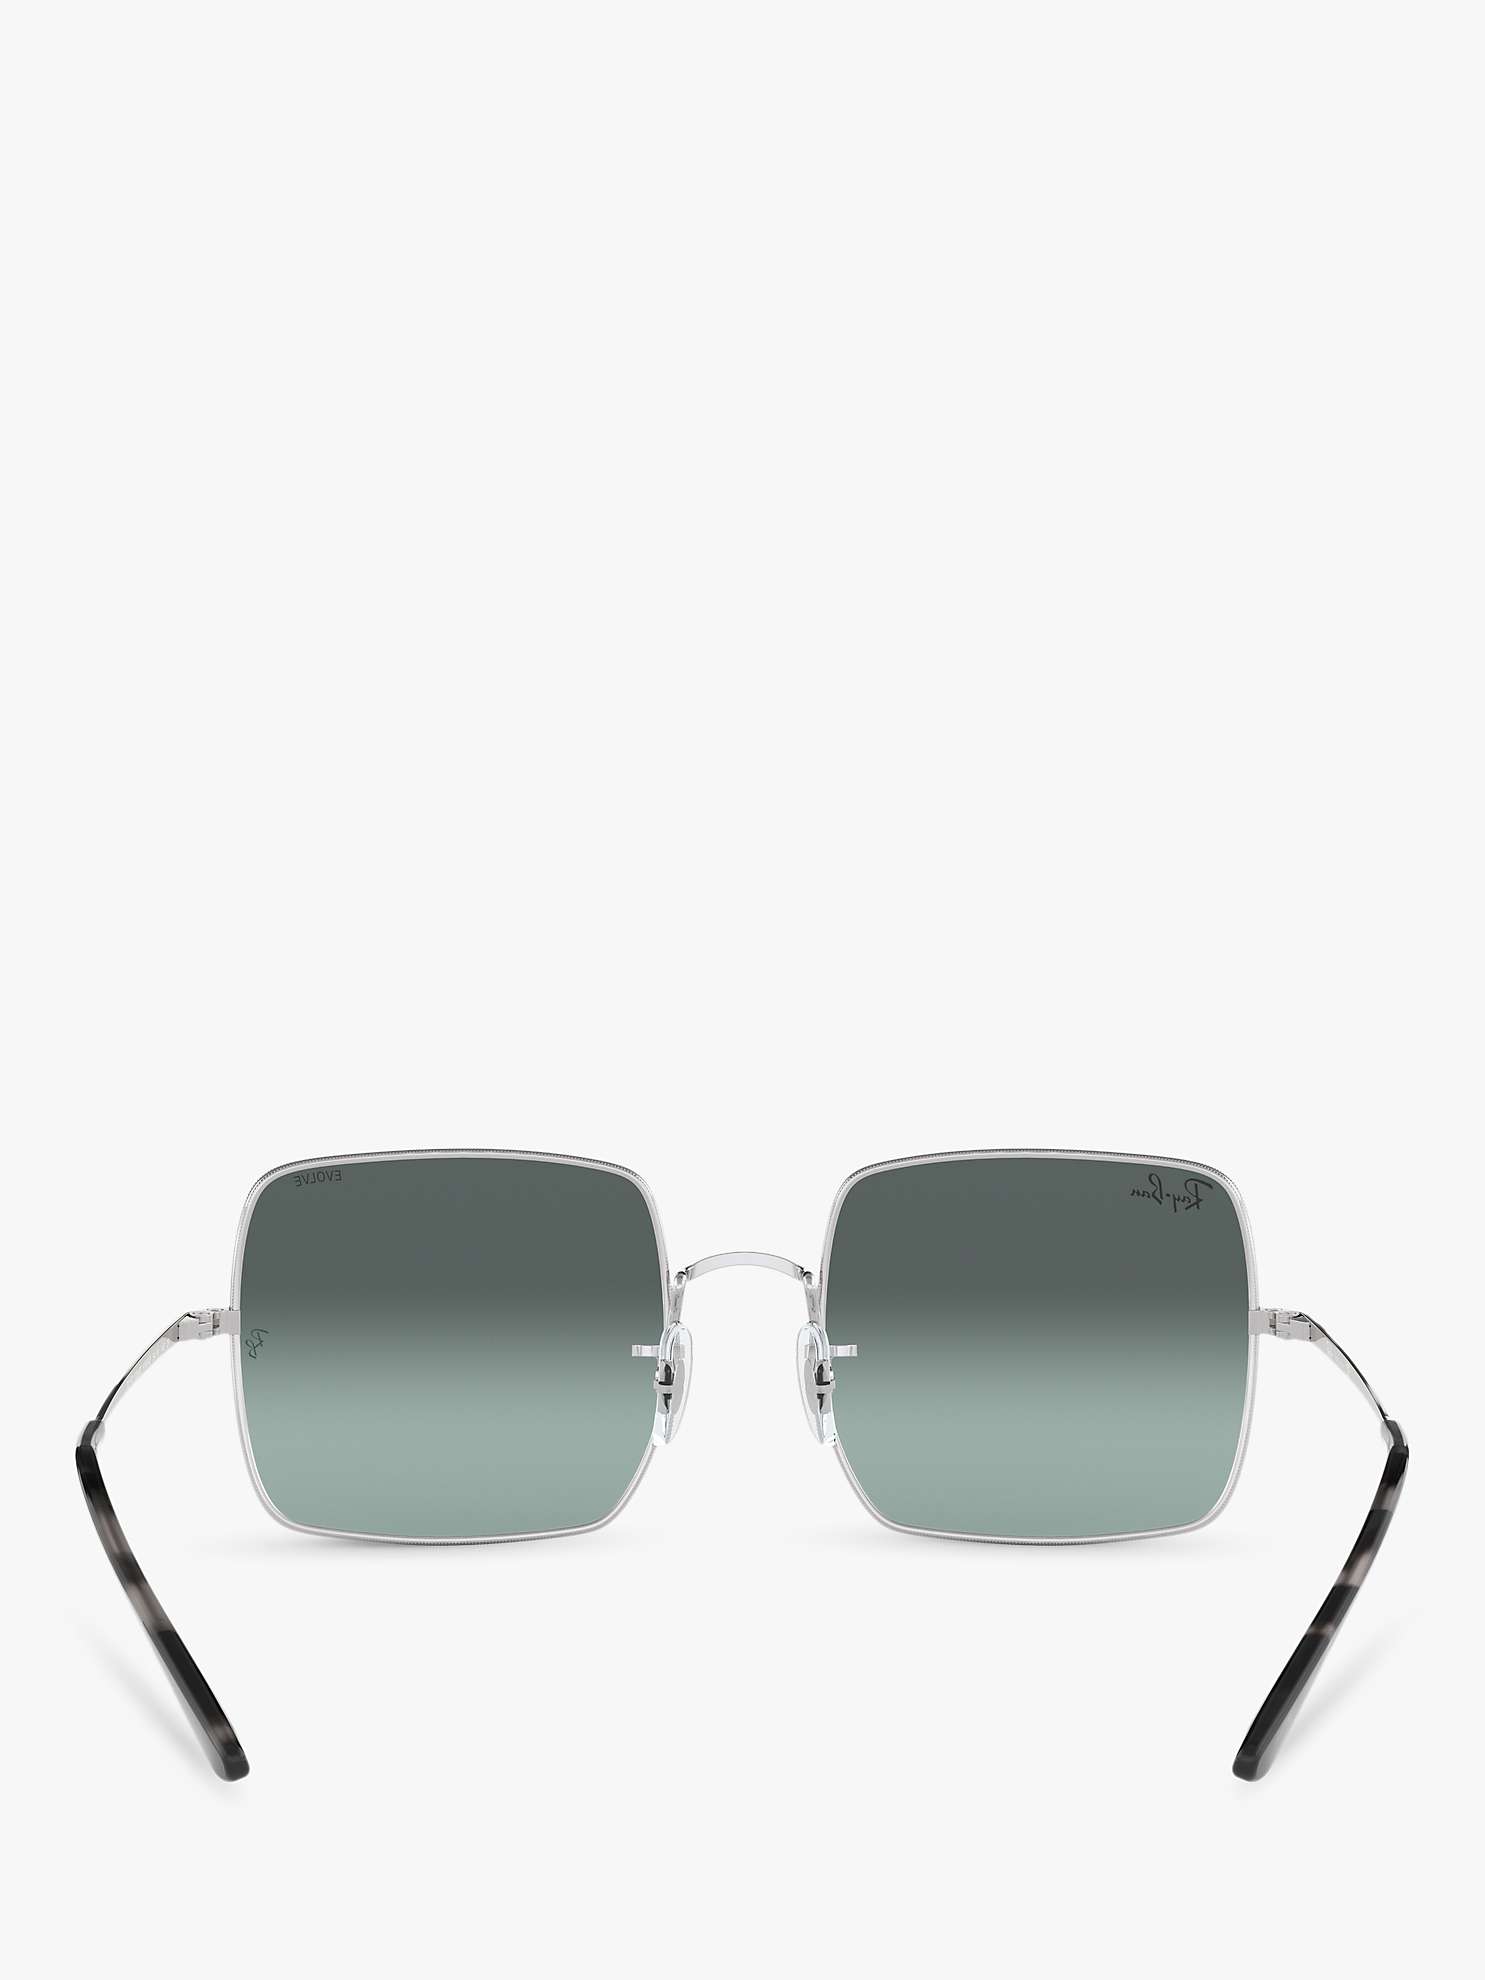 Buy Ray-Ban RB1971 Unisex Square Sunglasses Online at johnlewis.com